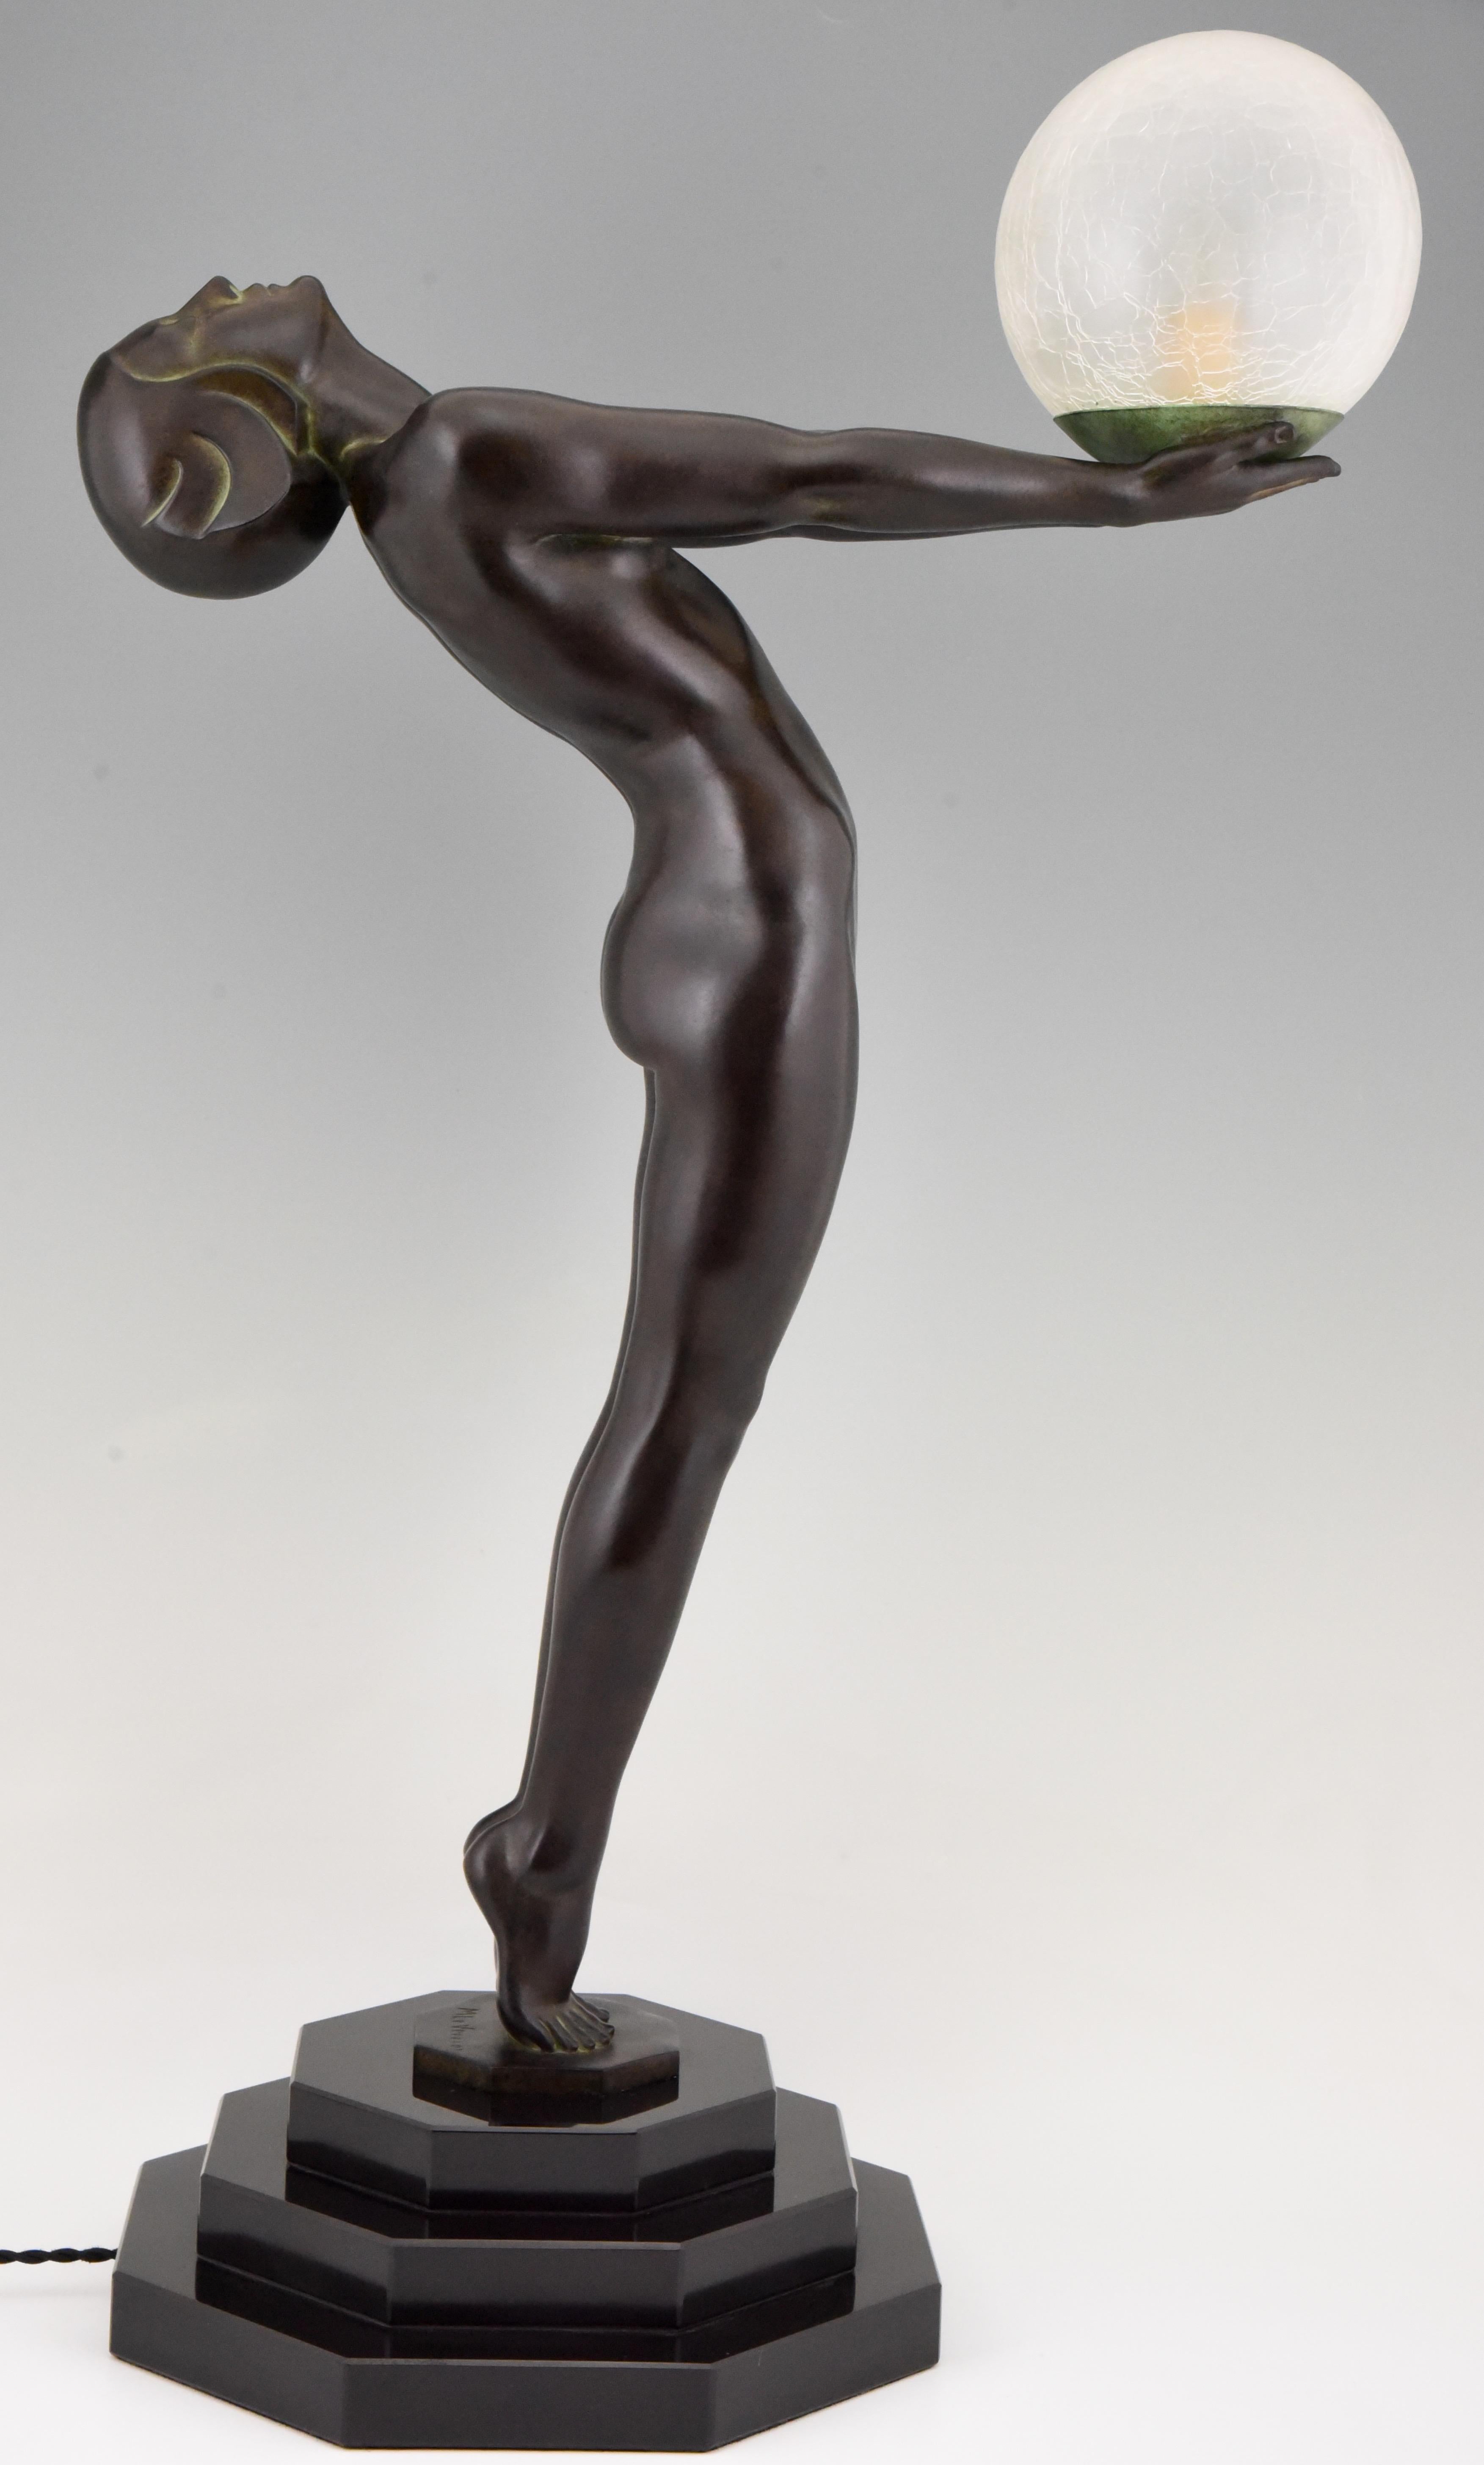 Metal Art Deco style Lamp Clarté Nude with Globe by Max Le Verrier H. 33 inch / 84 cm For Sale